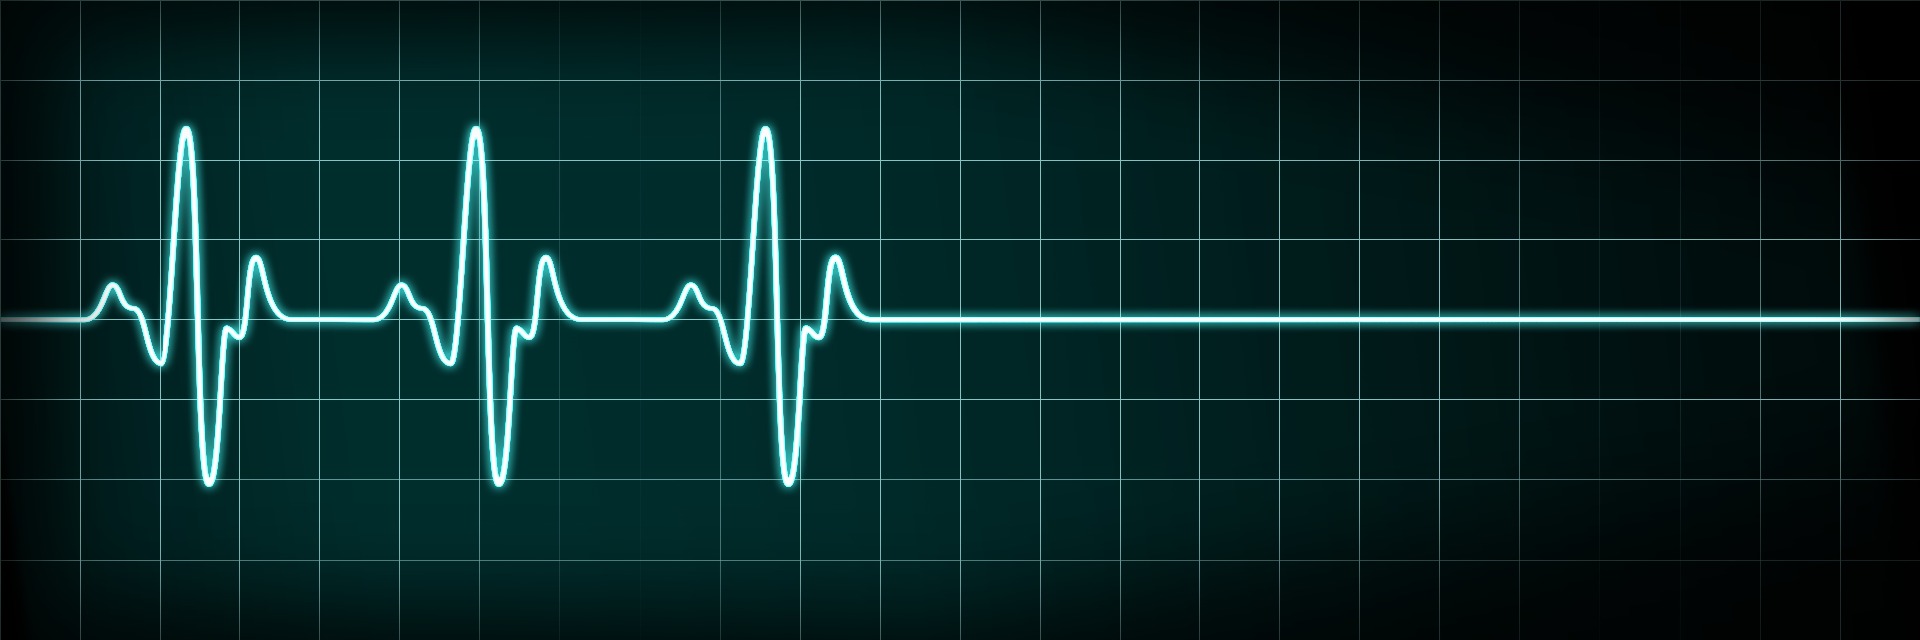 Heart monitor showing when a person has died